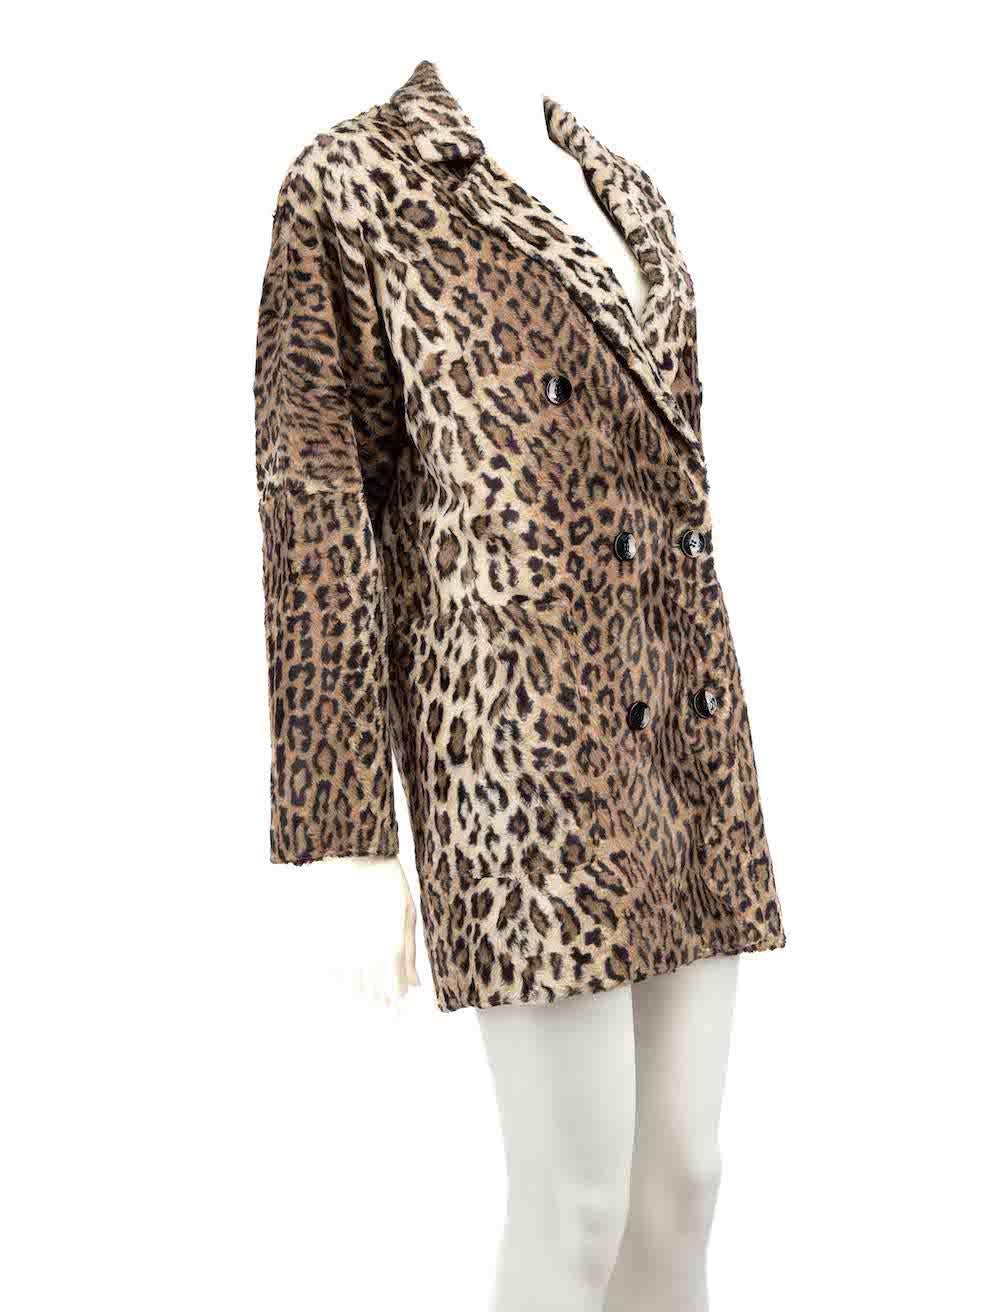 CONDITION is Very good. Minimal wear to coat is evident. Minimal wear to the left sleeve cuff with thinning to the texture on this used Redemption designer resale item.
 
 Details
 Brown
 Faux fur
 Coat
 Leopard pattern
 Double breasted
 Button